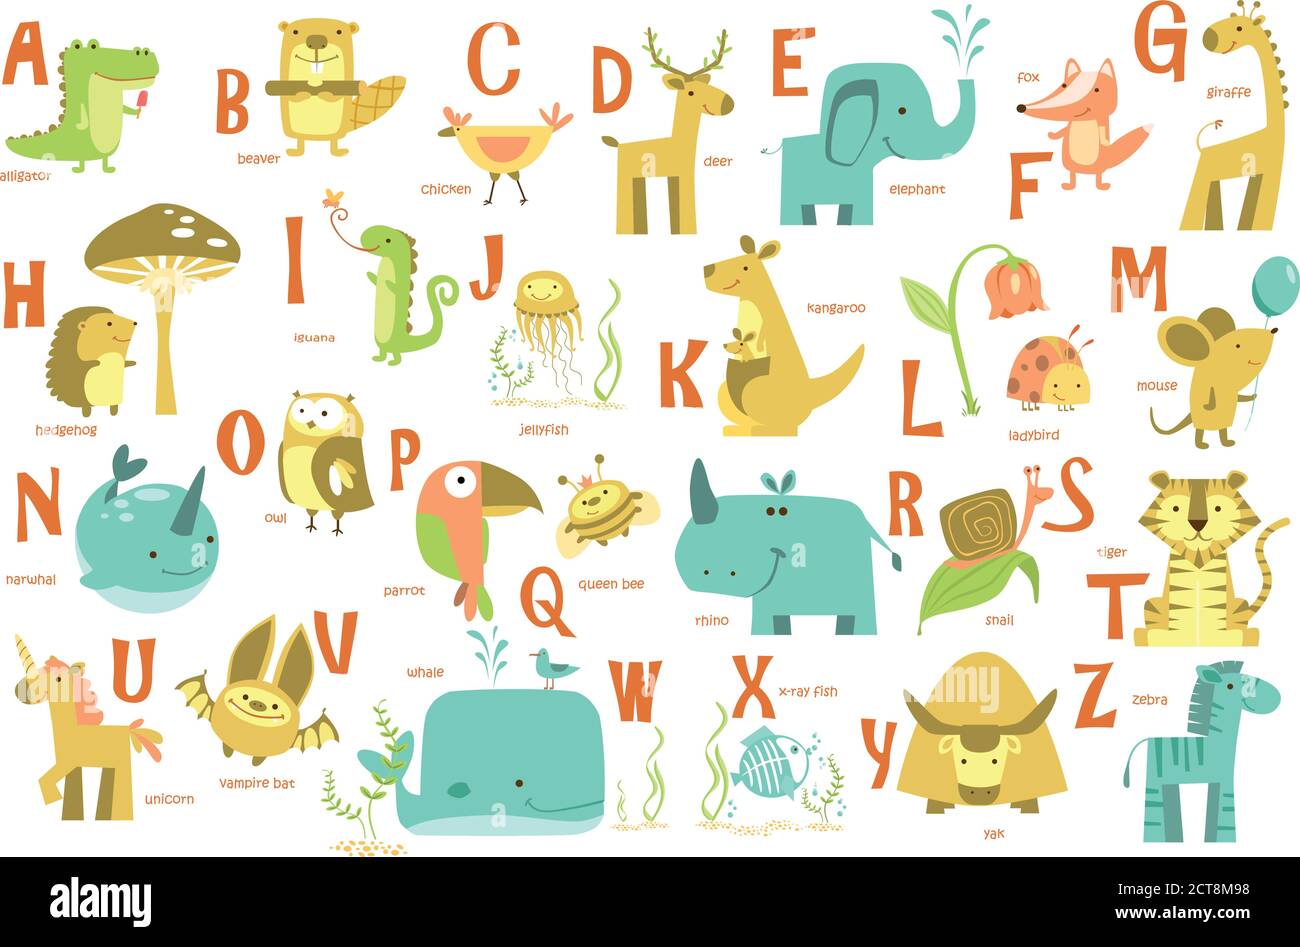 Alphabet and animals. ABC with different animals Stock Vector